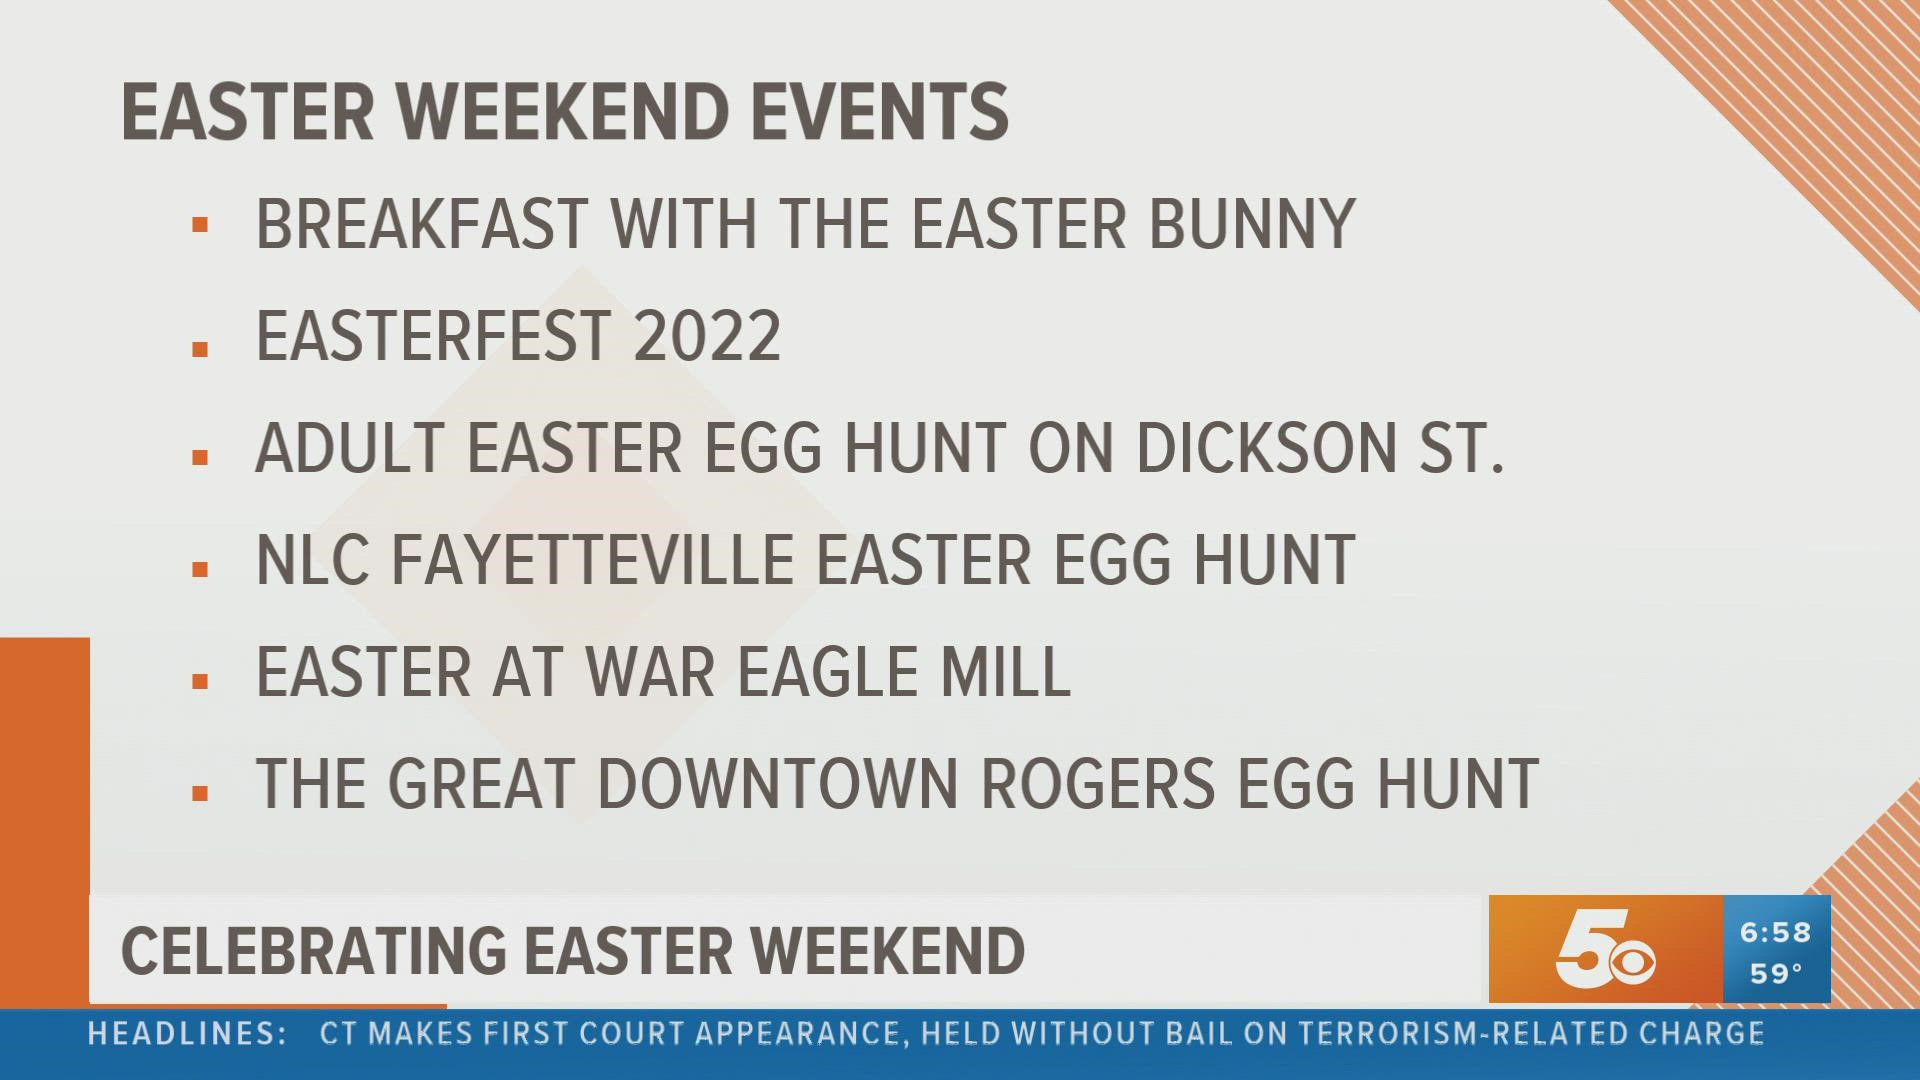 There are several events happening this Easter weekend throughout our area.